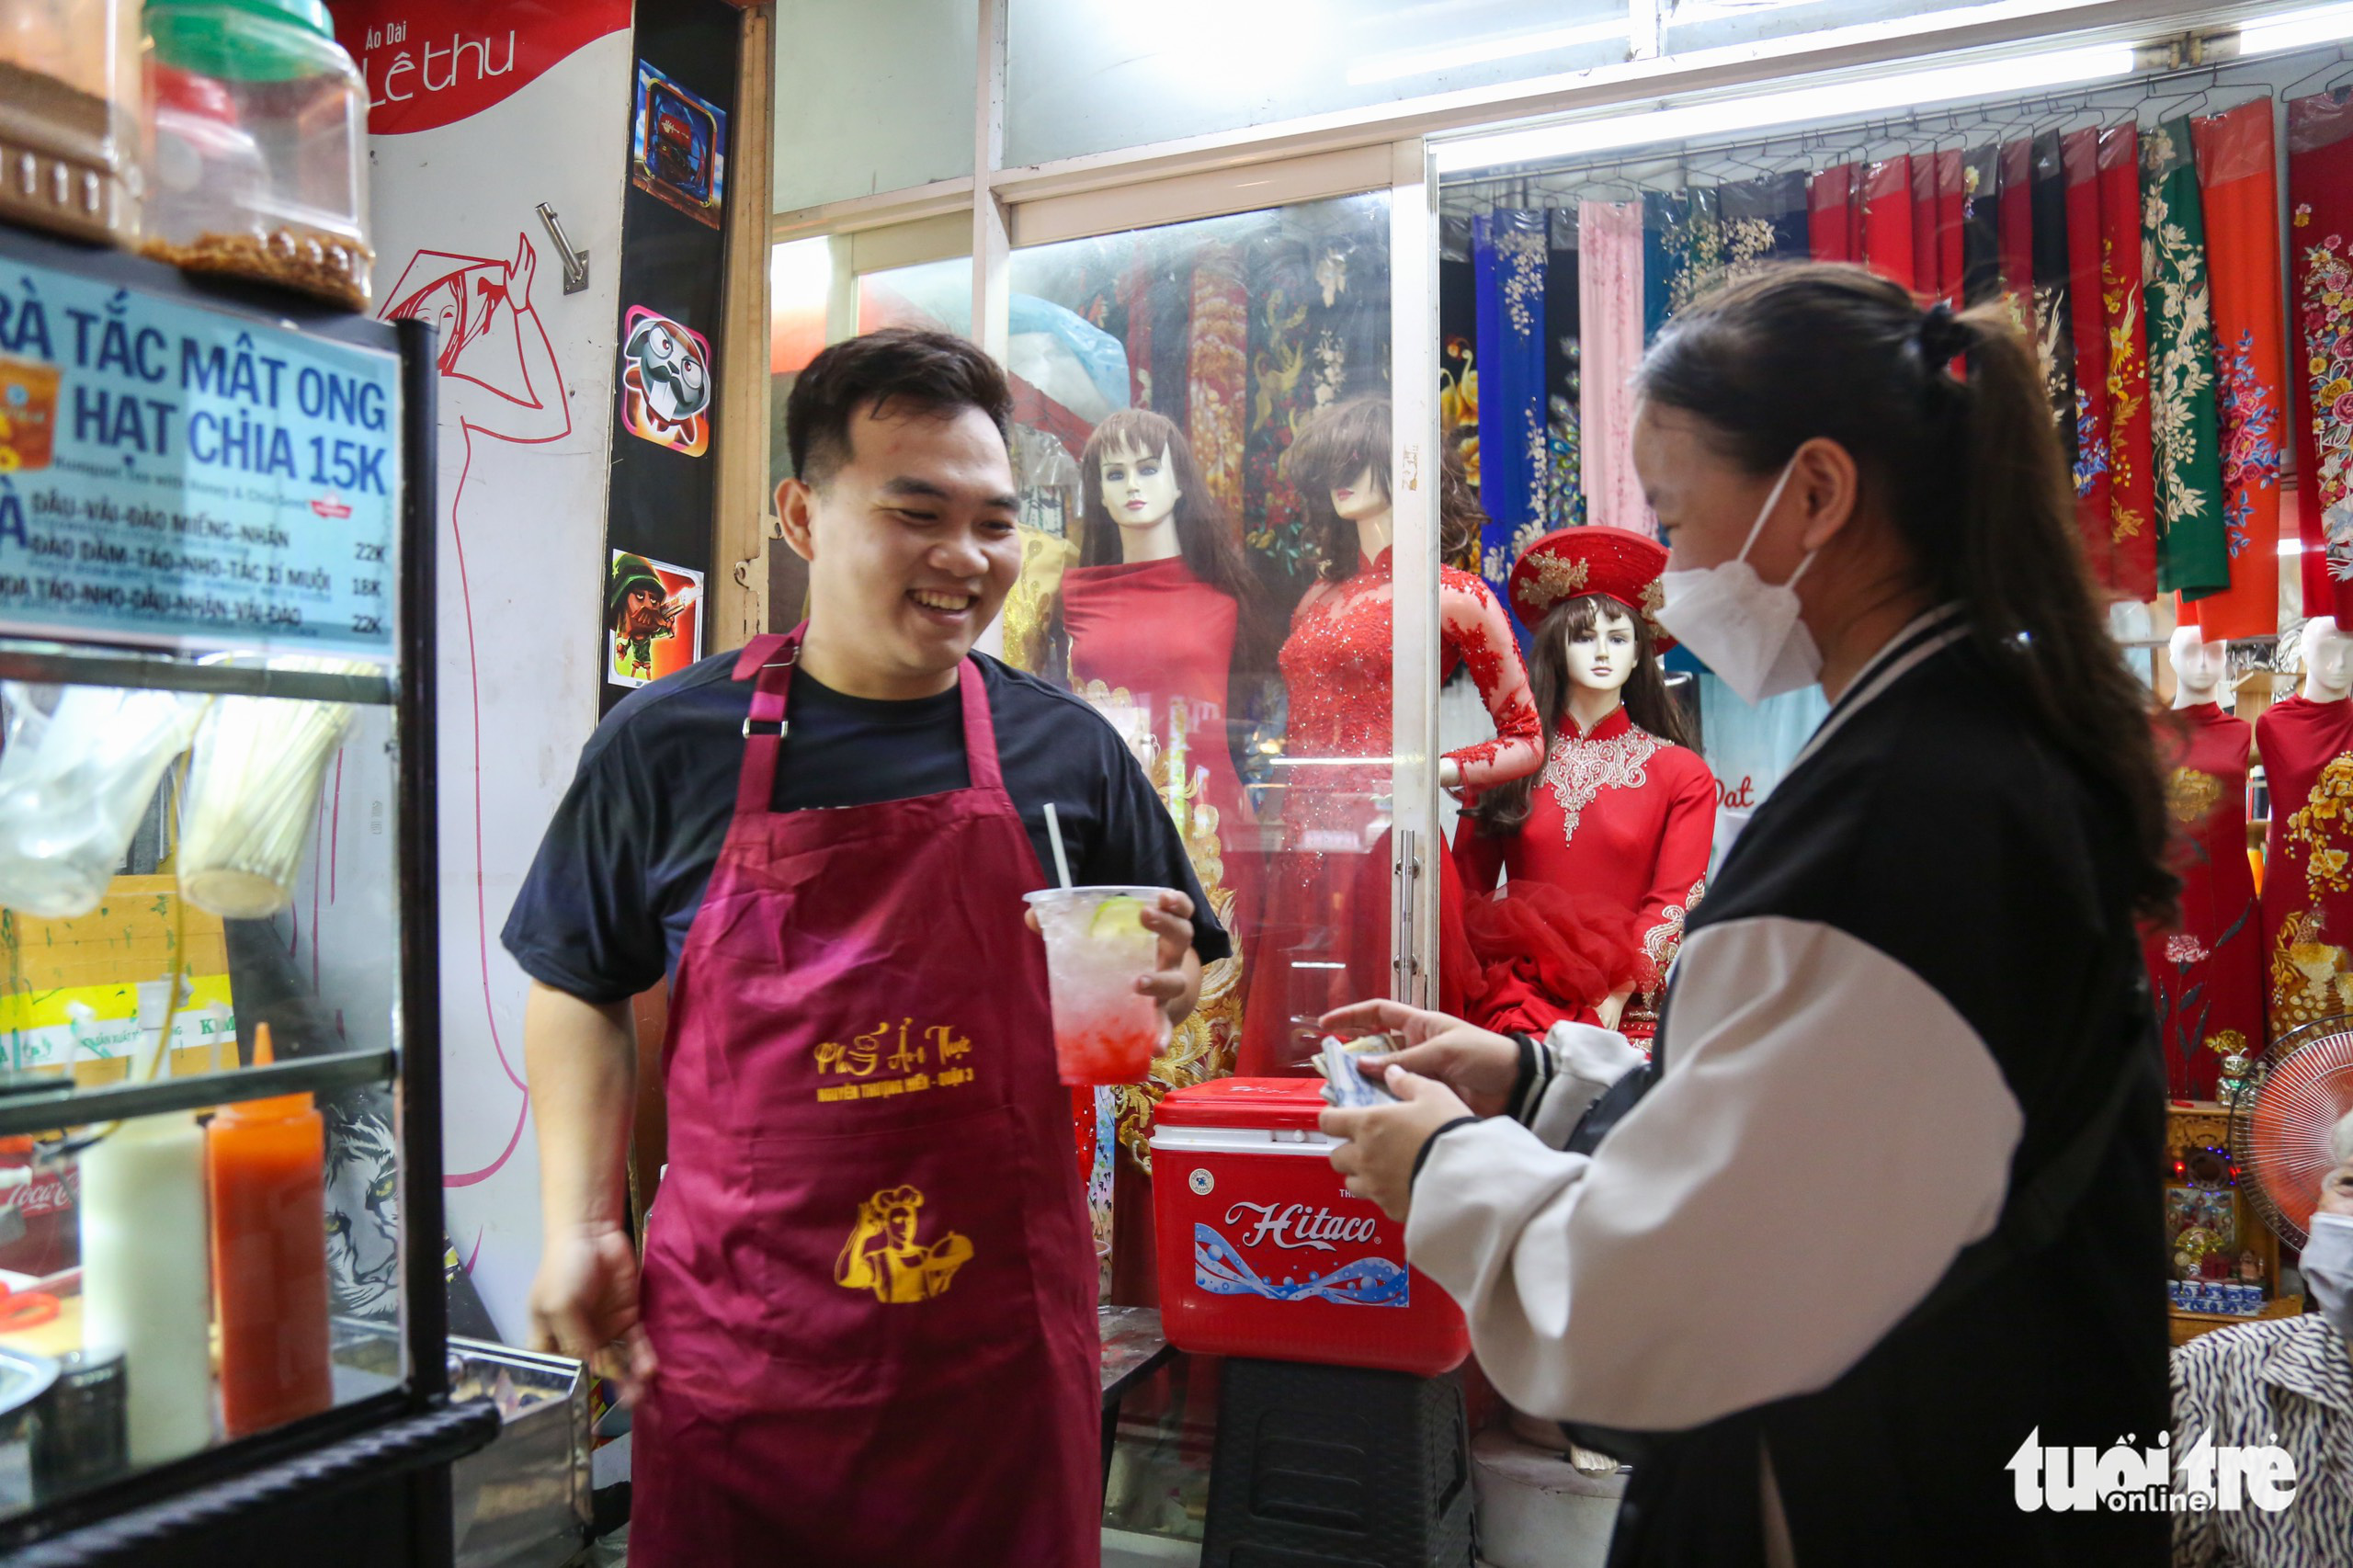 Nam (L) sells a beverage to a customer at Nguyen Thuong Hien Food Street in District 3, Ho Chi Minh City, December 21, 2022. Photo: Phuong Quyen / Tuoi Tre